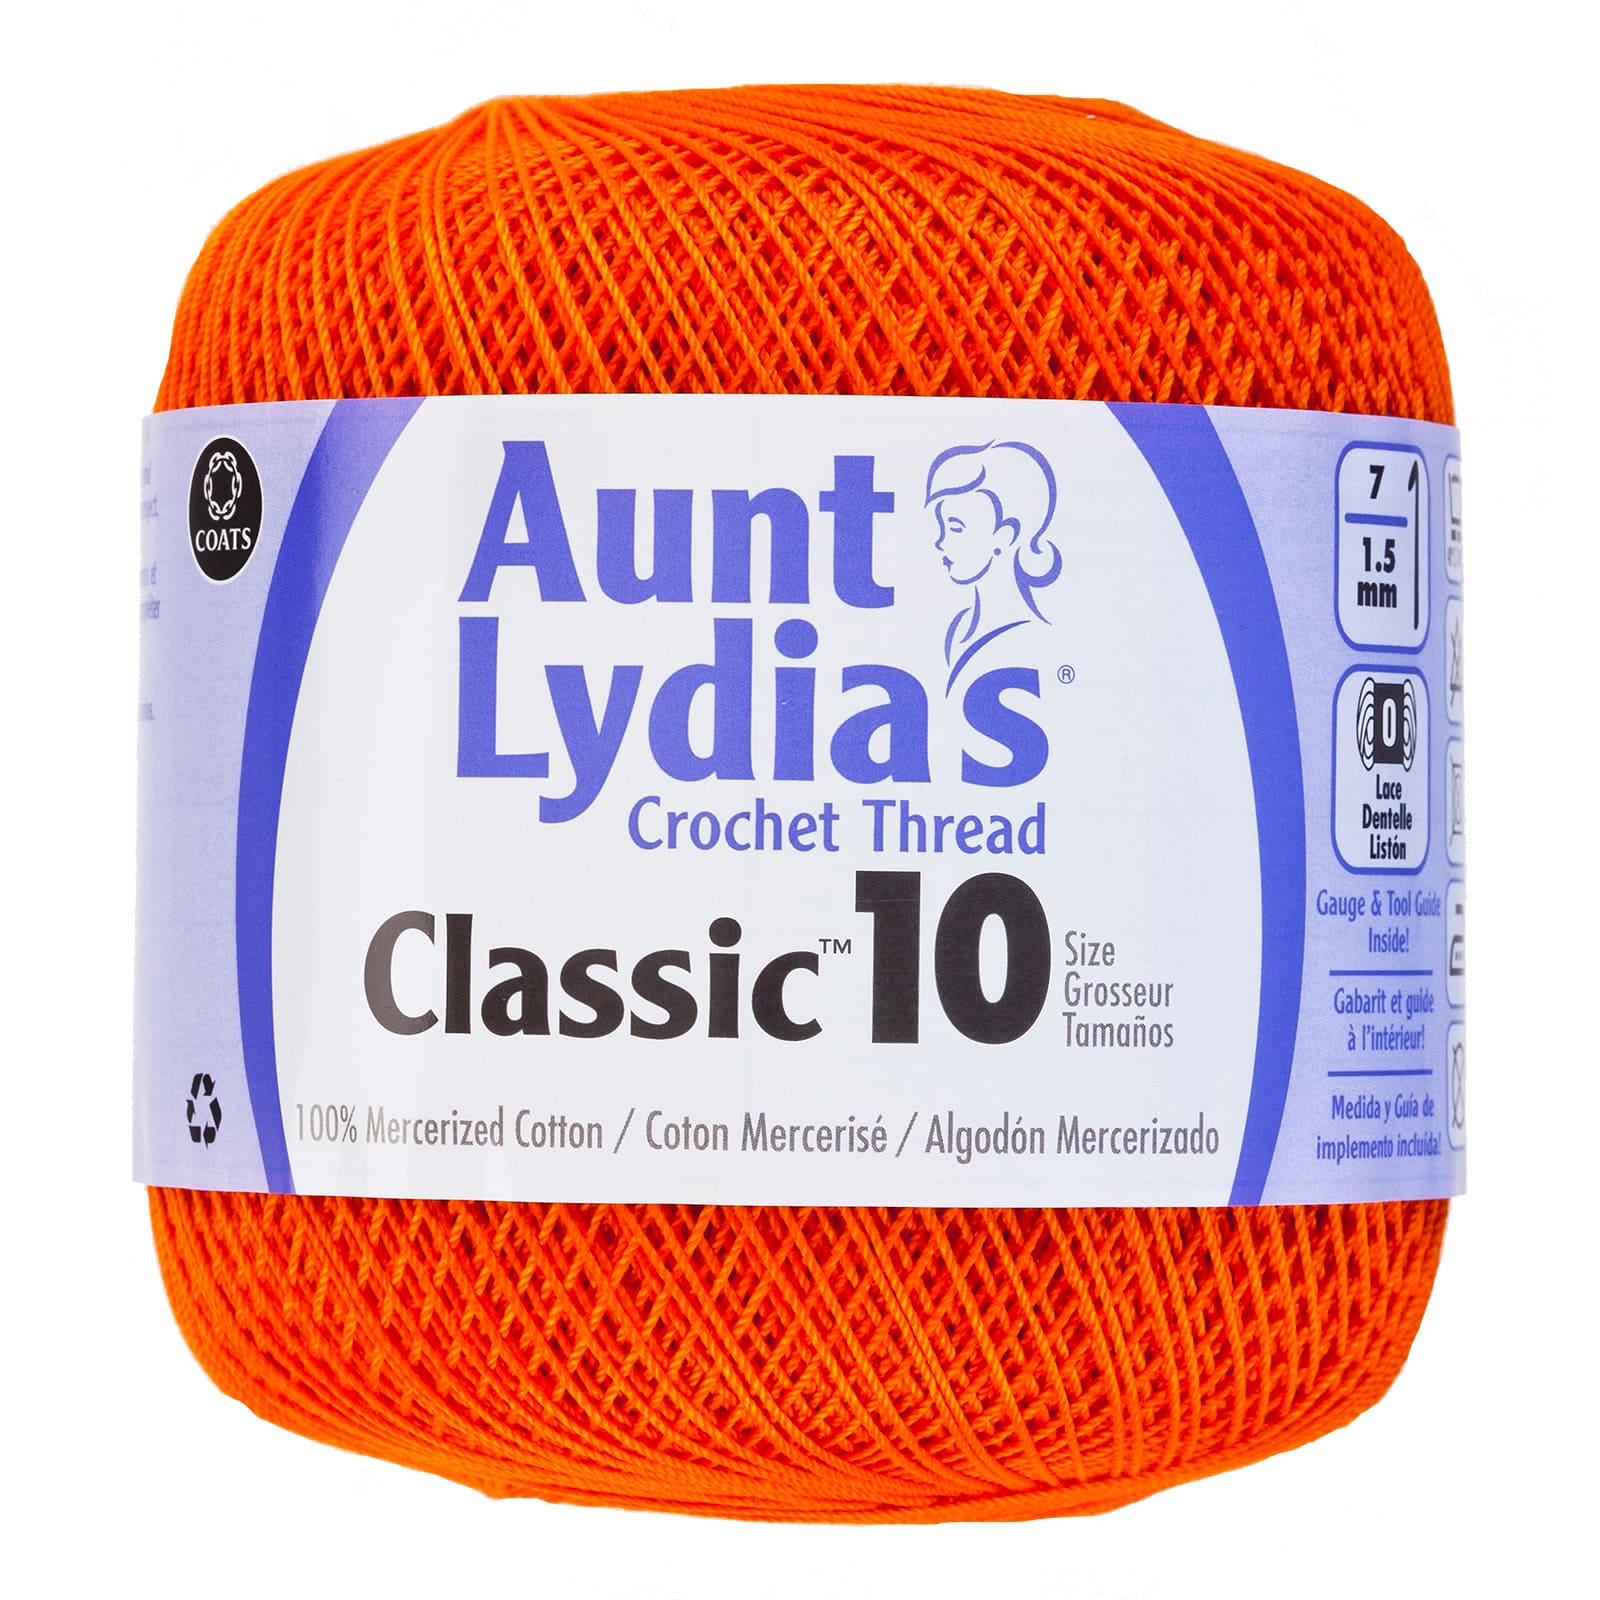 Aunt Lydia's Classic Crochet Thread Size 10-Bright Coral, 1 count